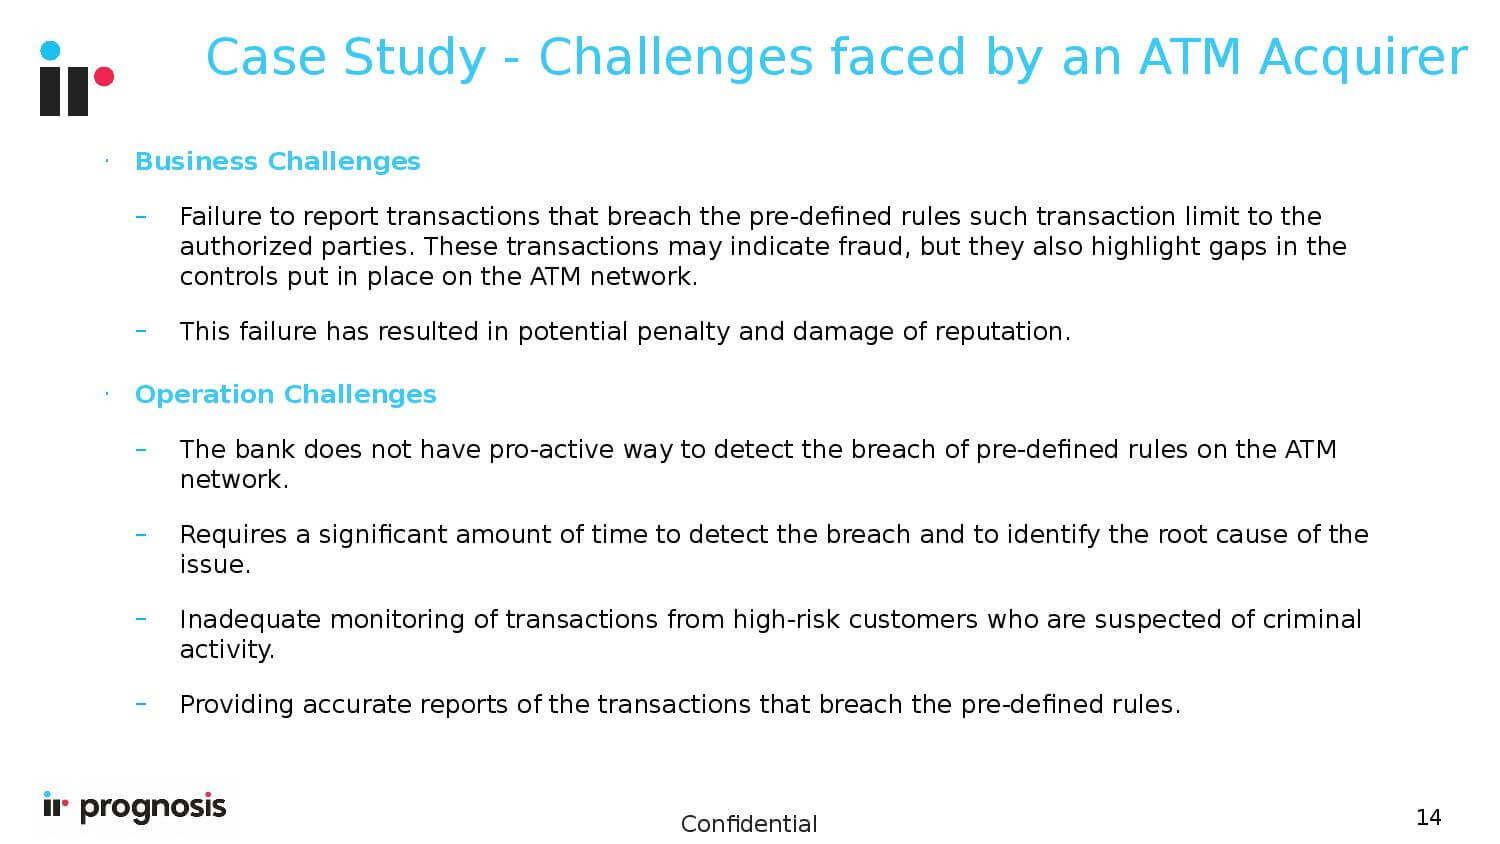 Case Study - Challenges faced by an ATM Acquirer